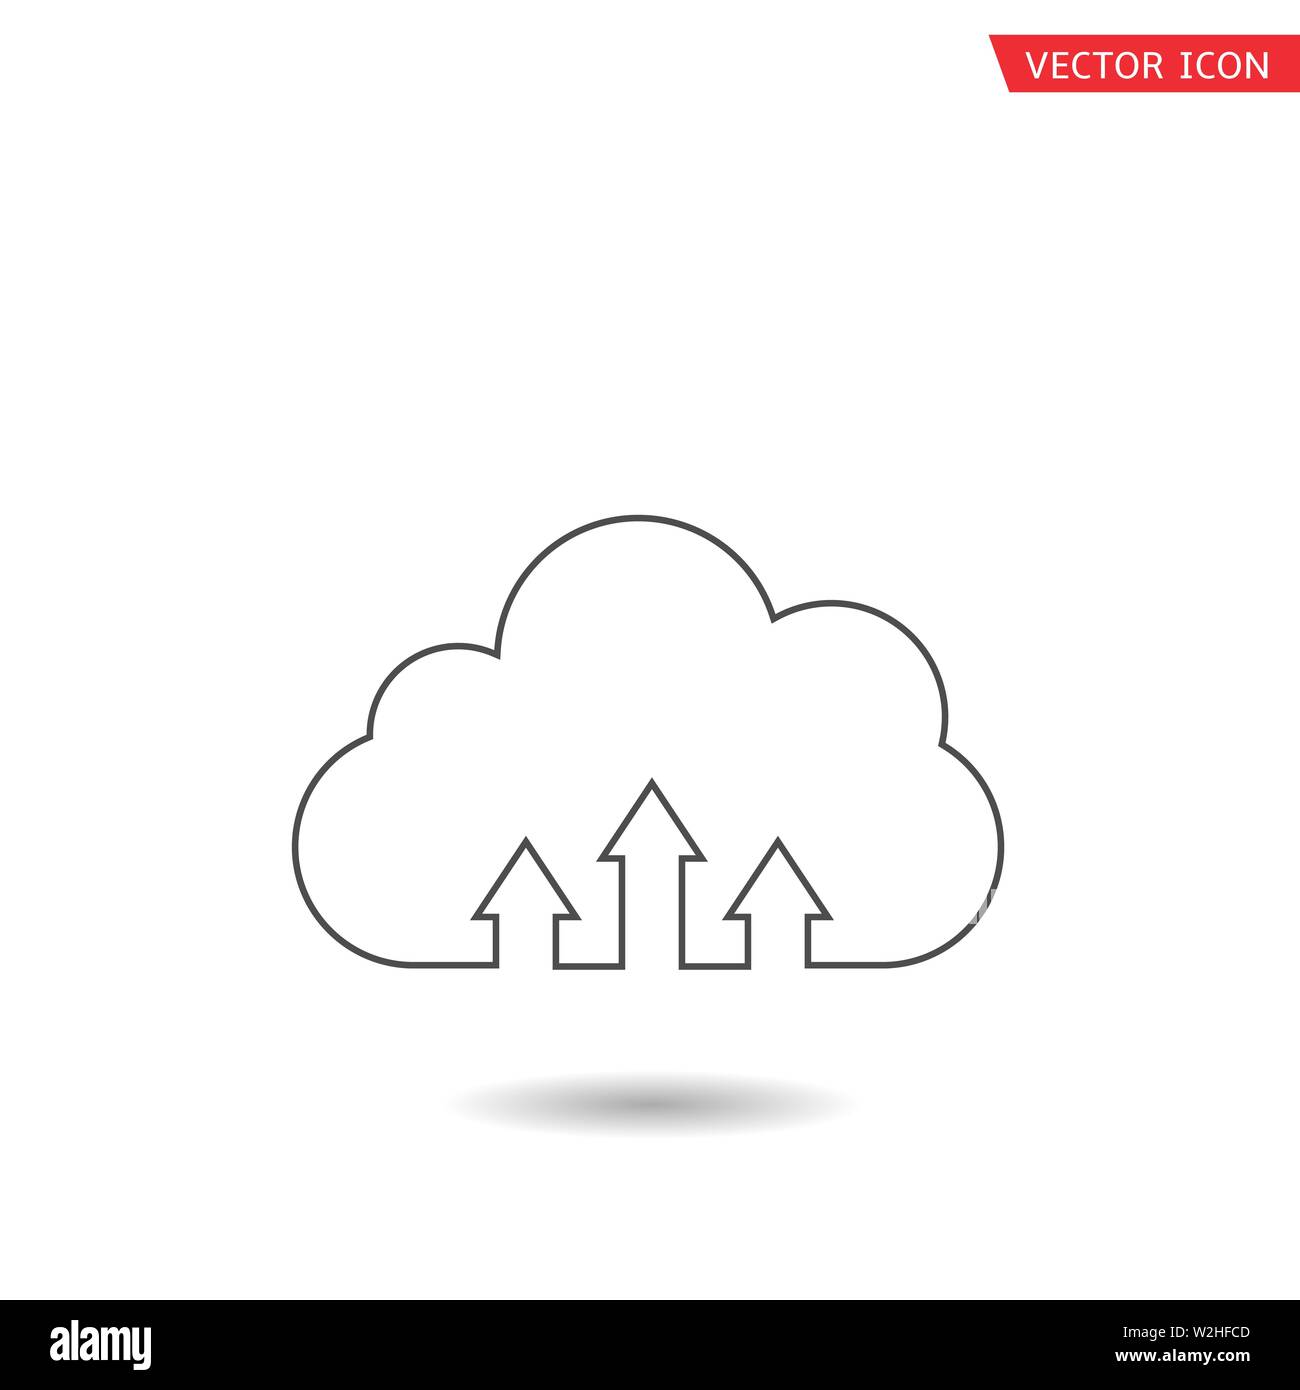 Cloud icon. Network technology, download and upload symbols Stock Vector